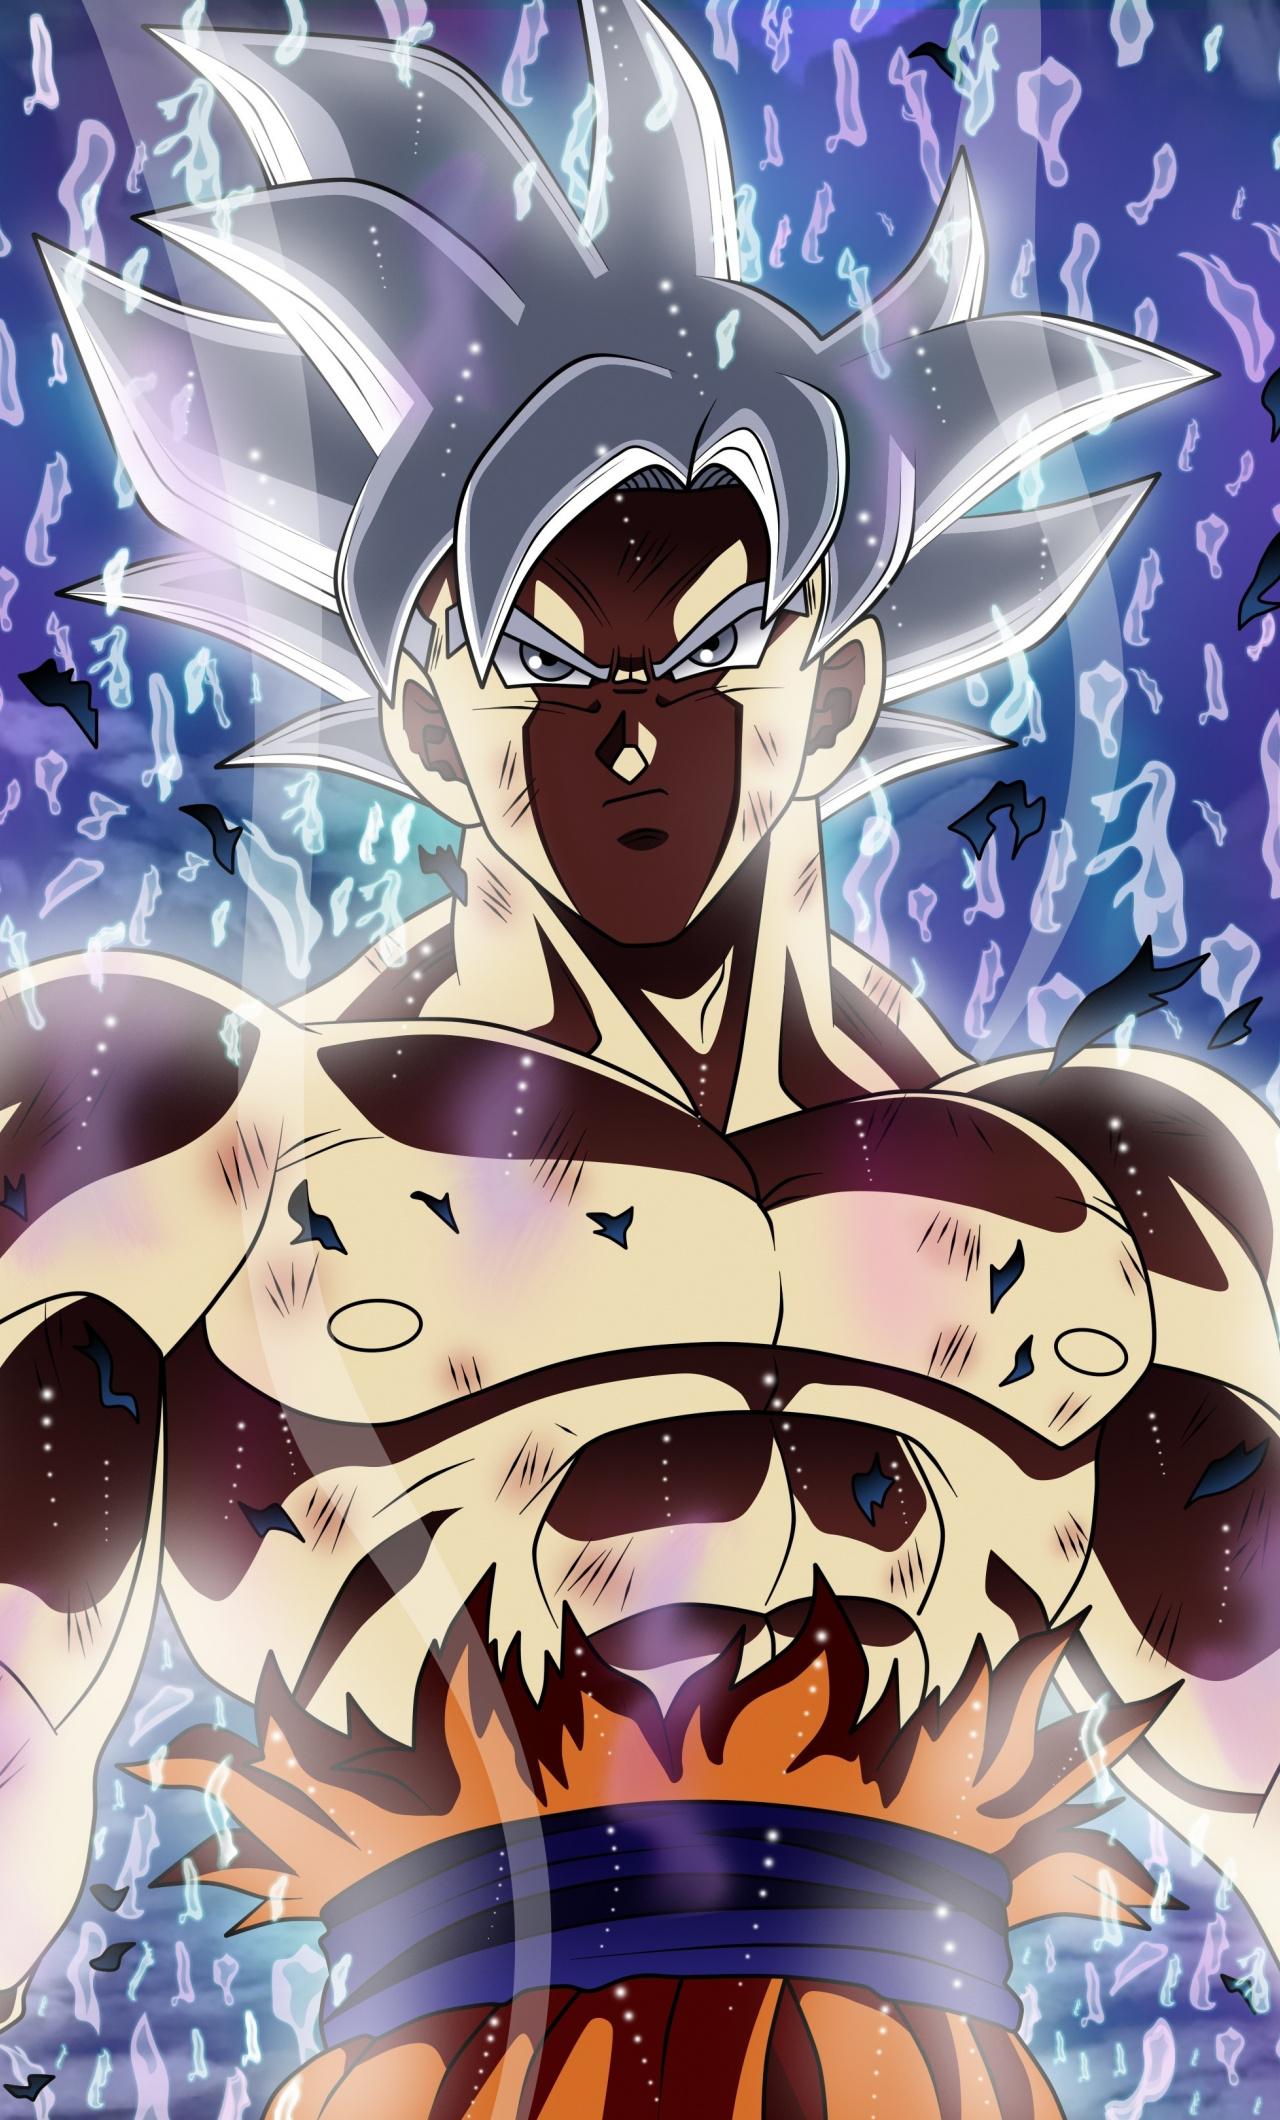 Download Dragon Ball Z wallpapers for iPhone in 2023  iGeeksBlog